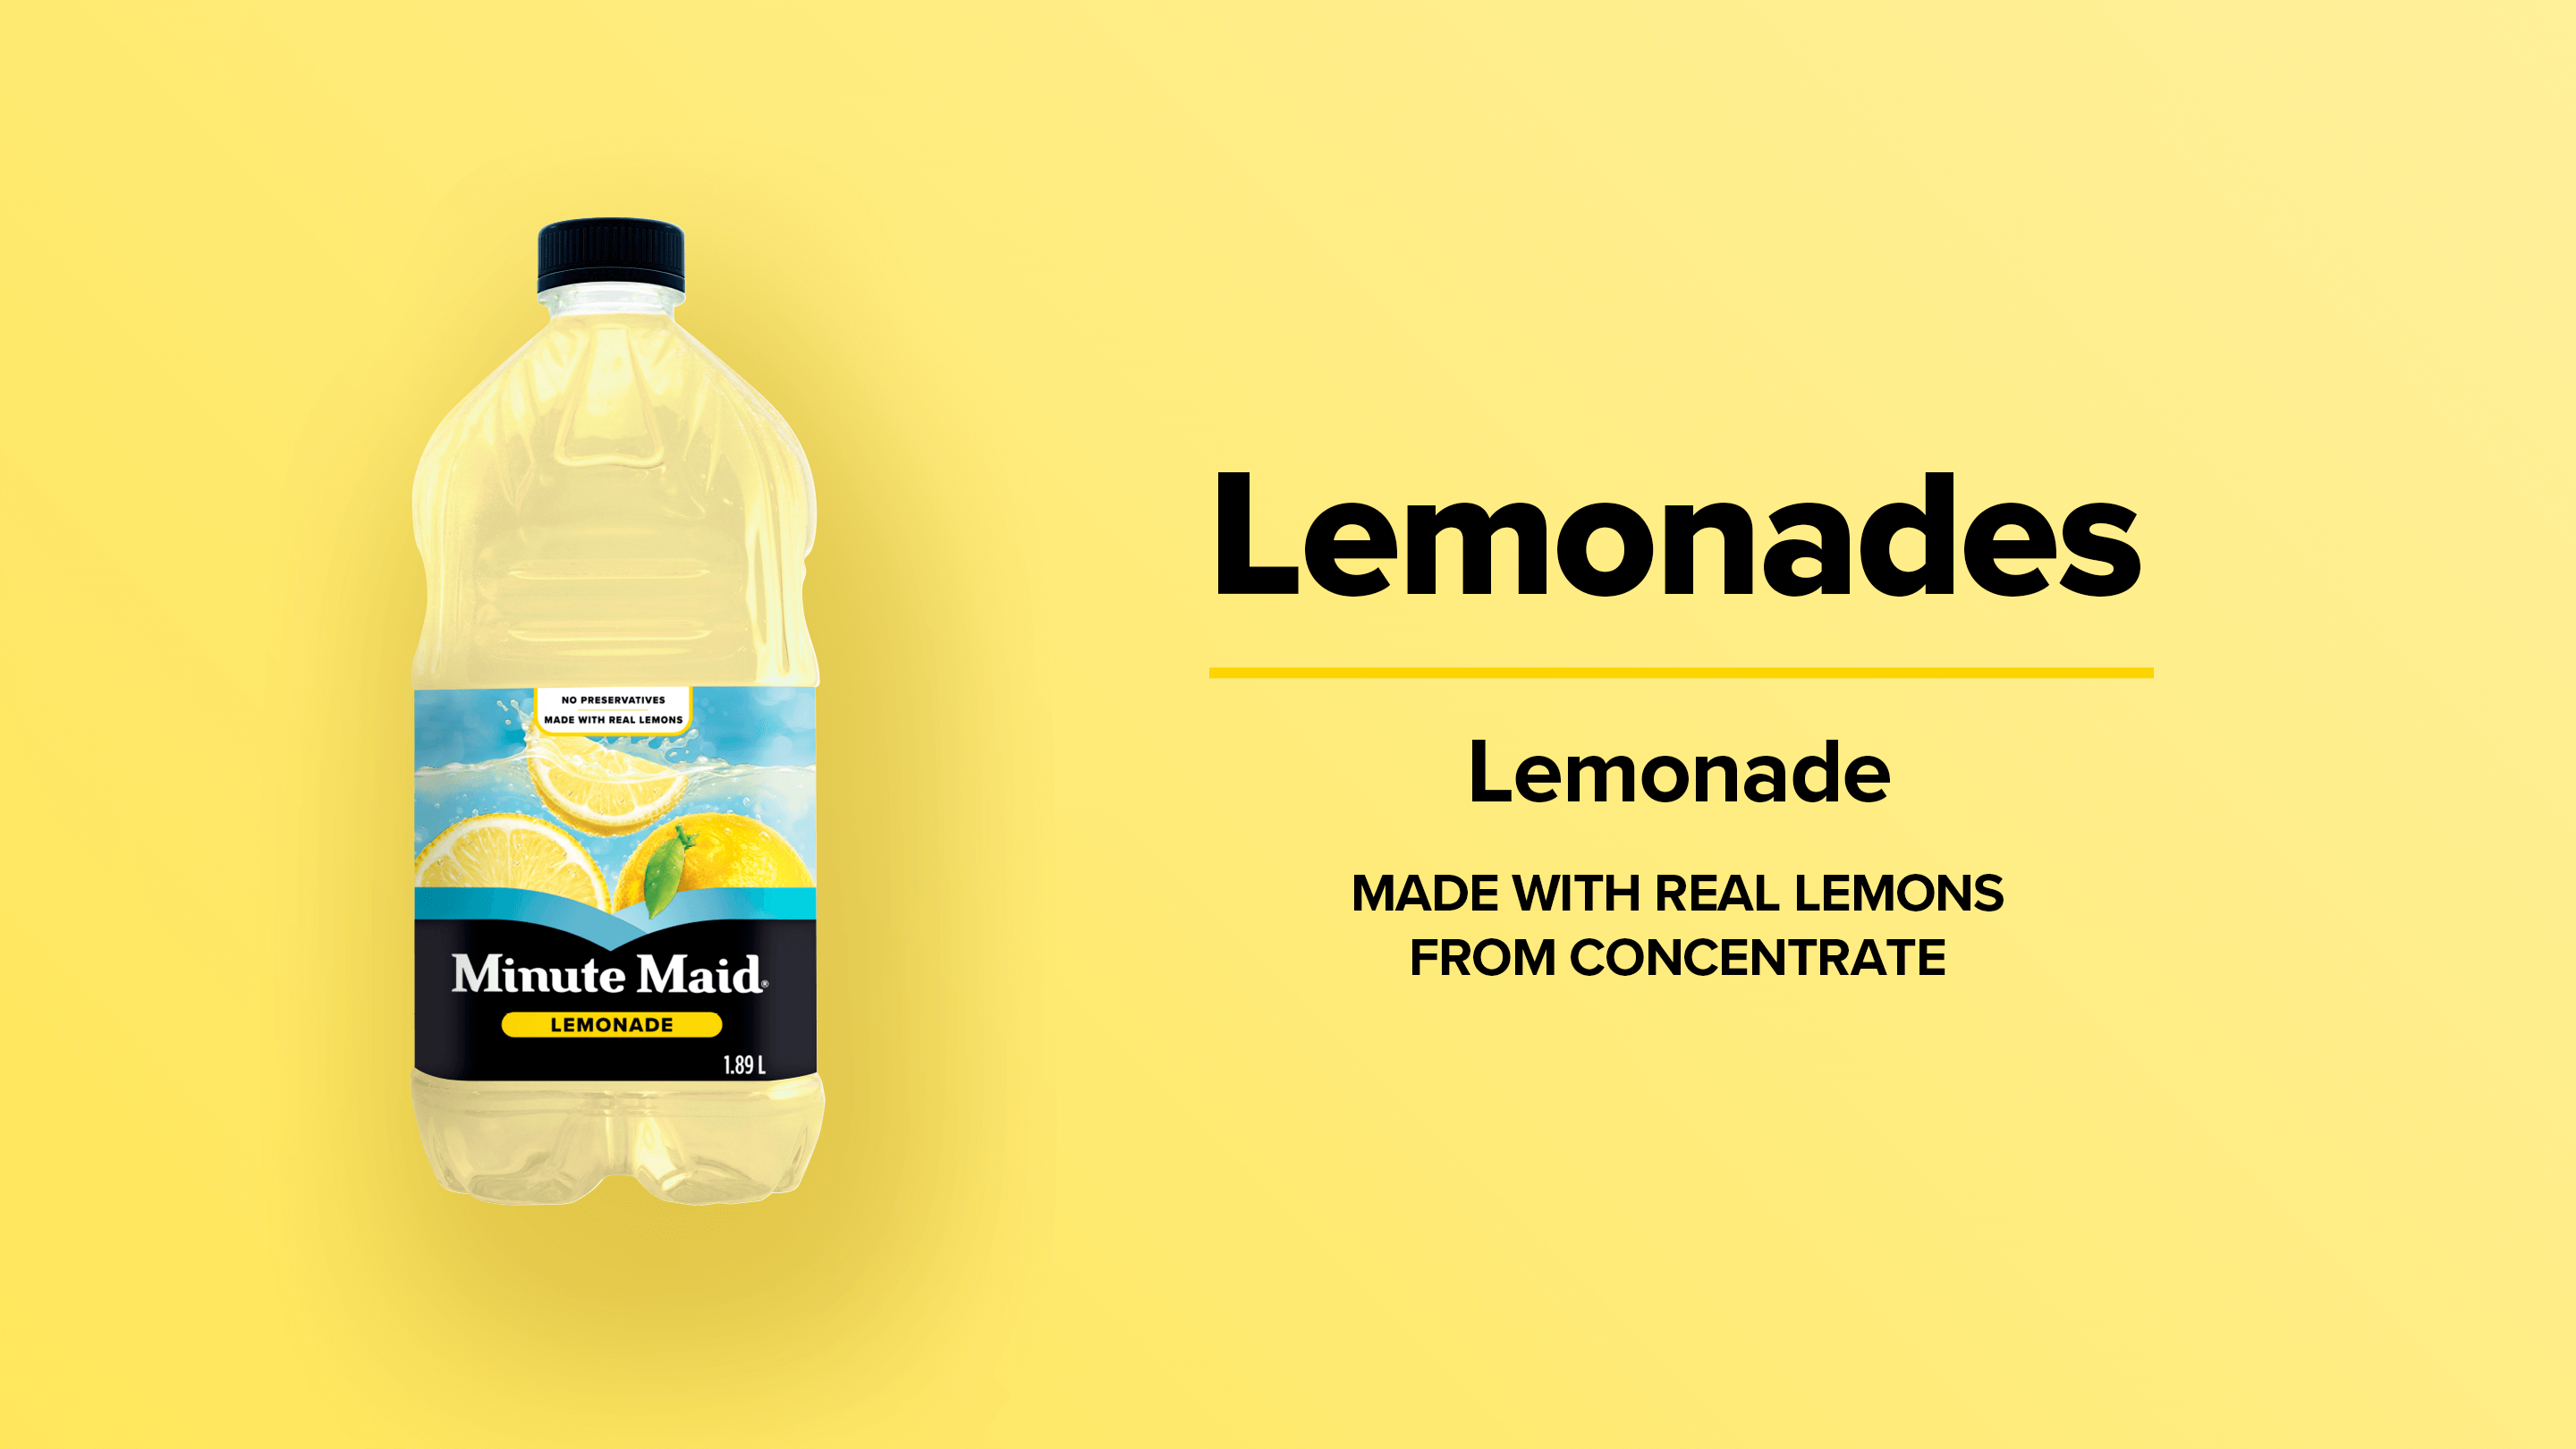 Minute Maid Lemonades. Lemonade. Made with Real Lemons from Concentrate.